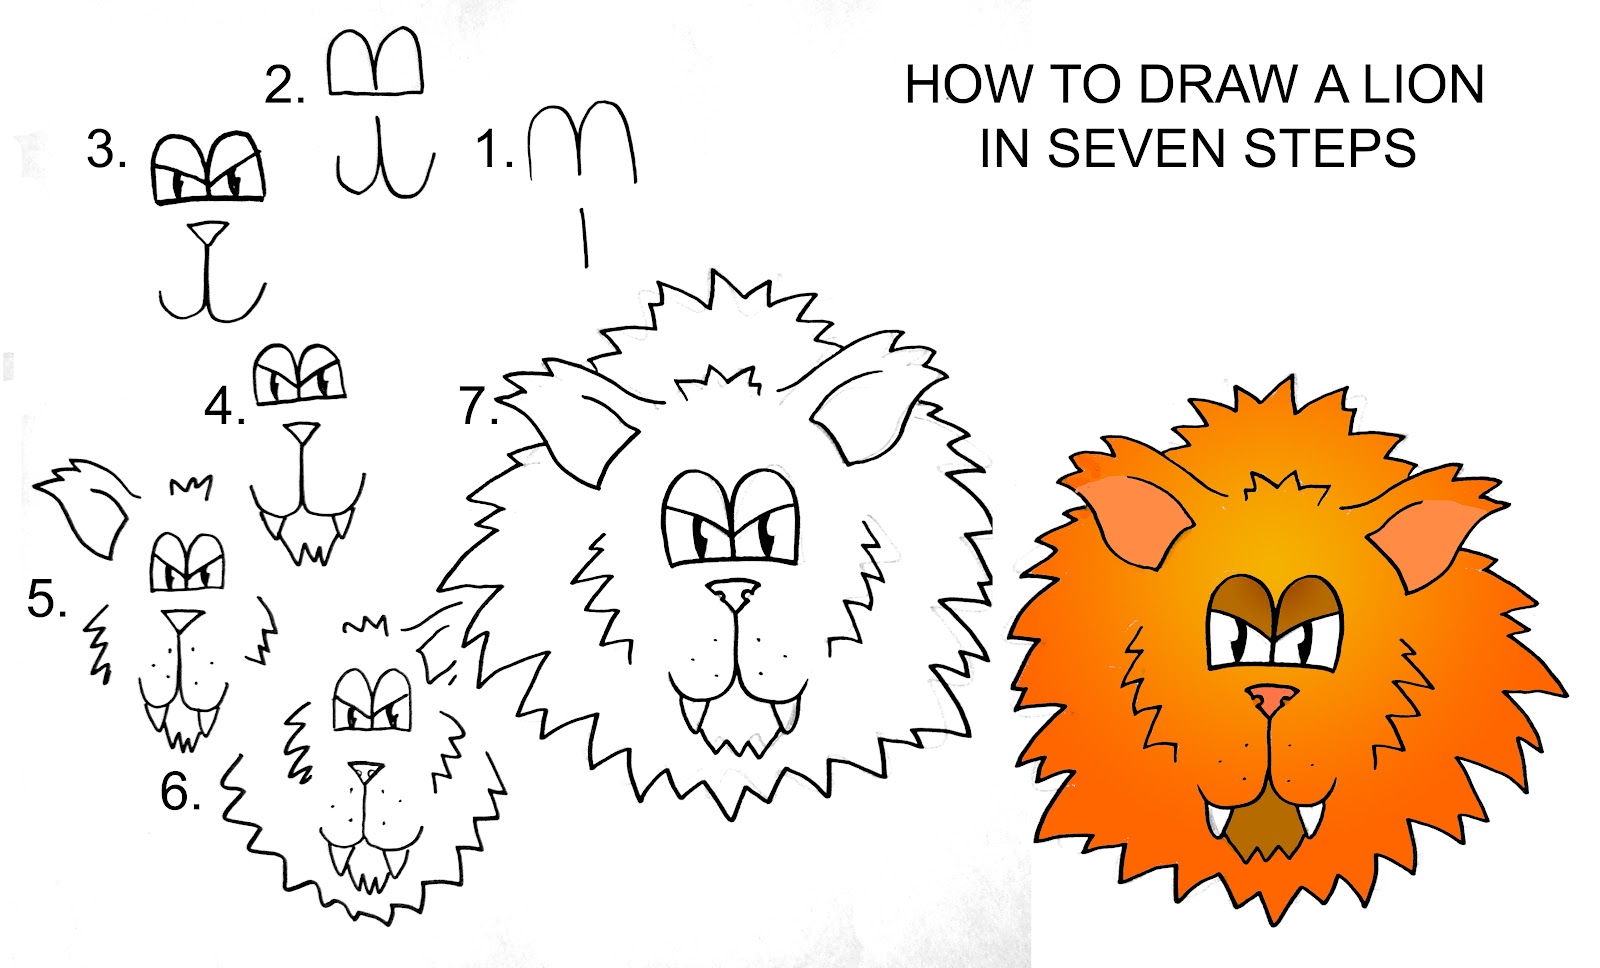 How To Draw A Lion Step By Step | DARYL HOBSON ARTWORK